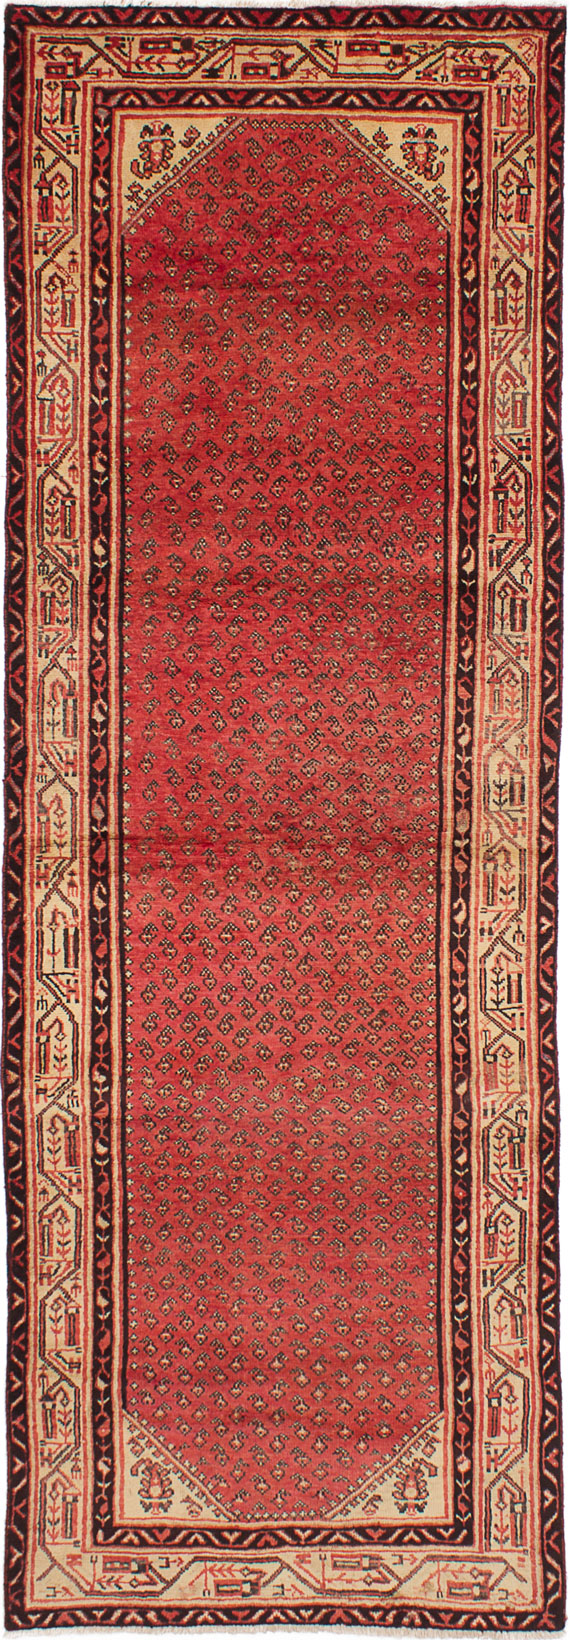 Hand-knotted Arak Red Wool Rug 3'5" x 10'4"  Size: 3'5" x 10'4"  